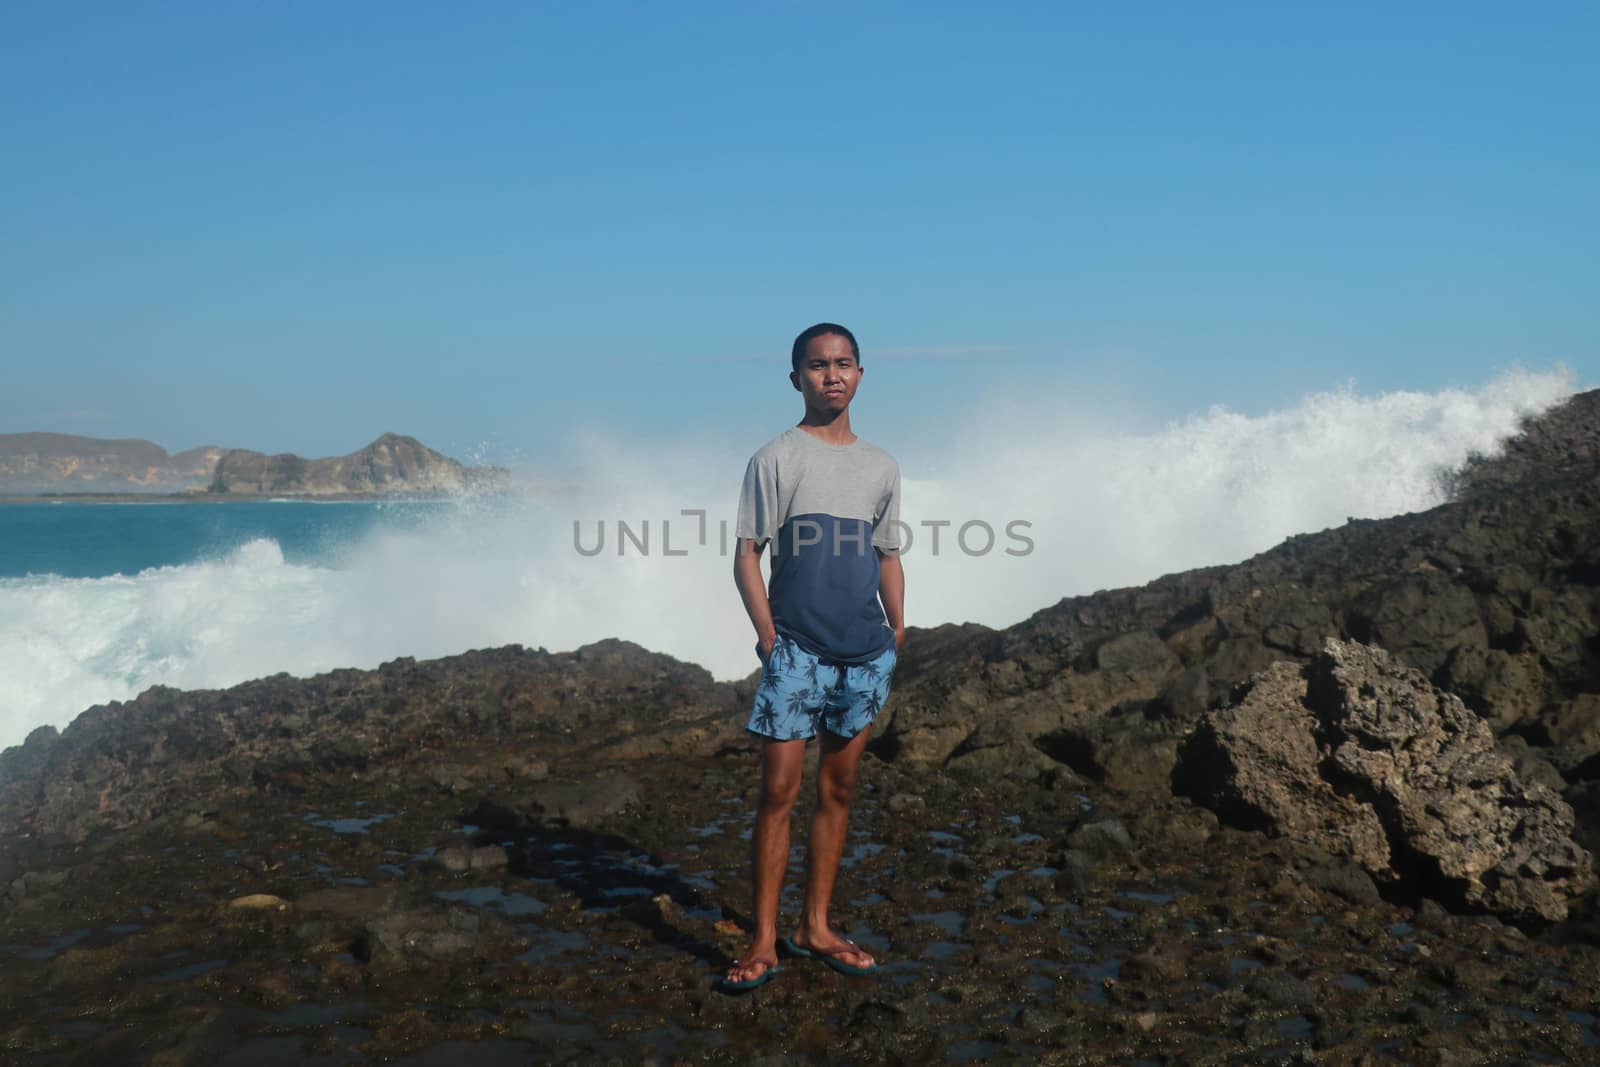 Waves hitting round rocks and splashing. A young man stands on a rocky shore and the waves crash against a cliff by Sanatana2008